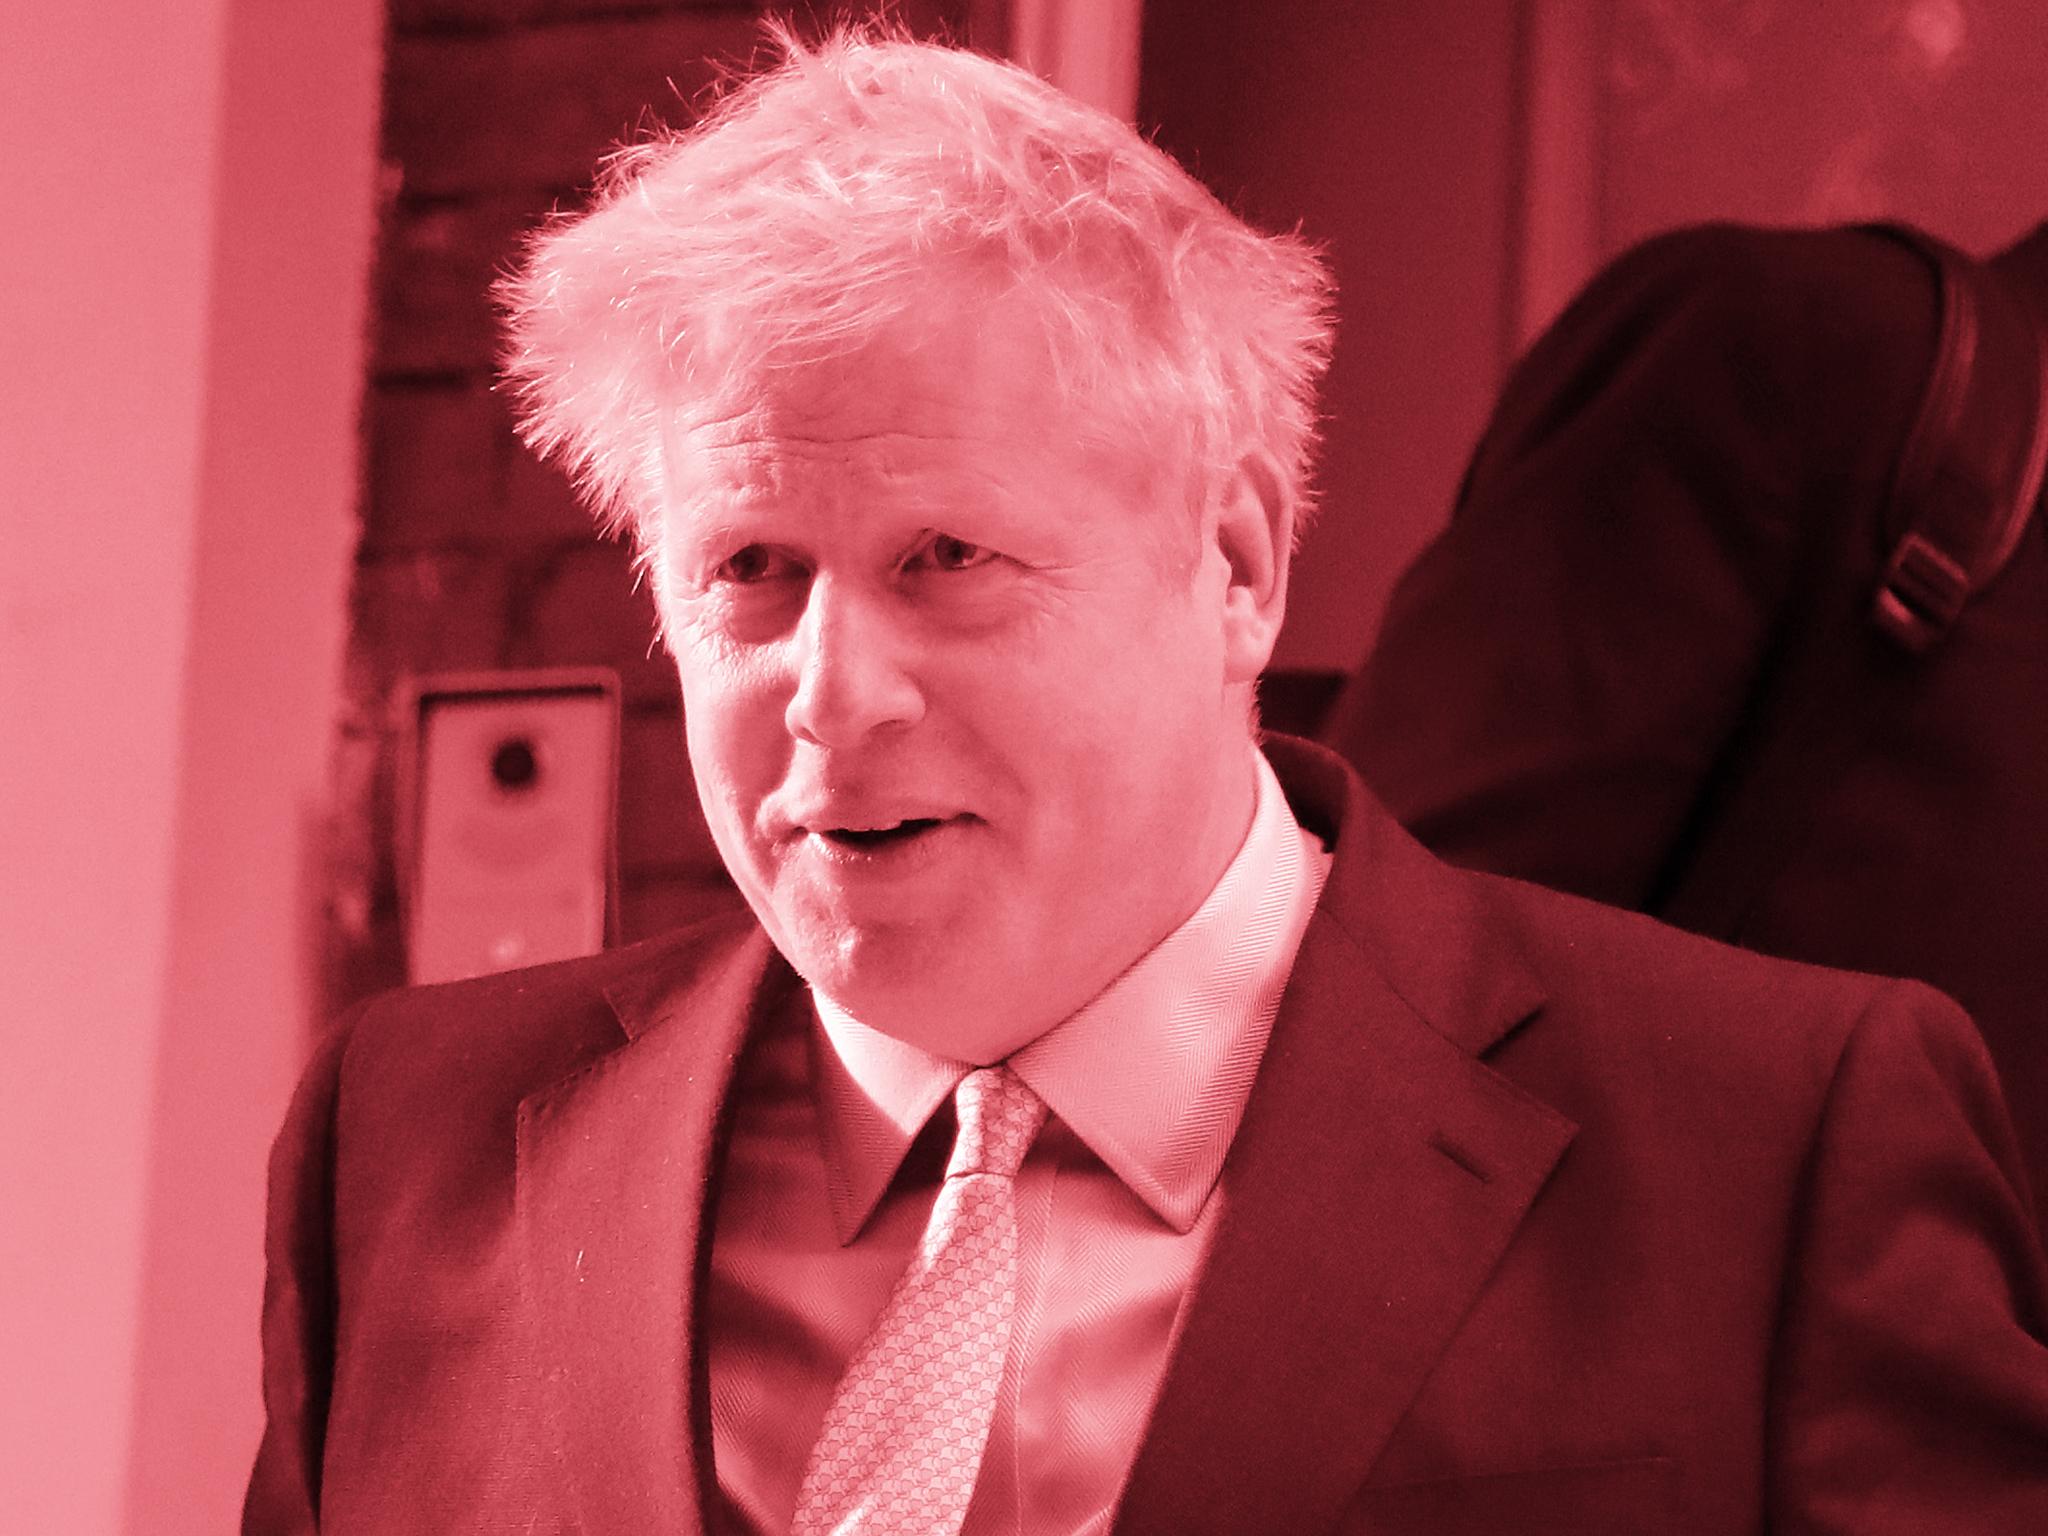 Boris Johnson cocaine use: What the Tory favourite to be next PM has said about taking illegal drugs